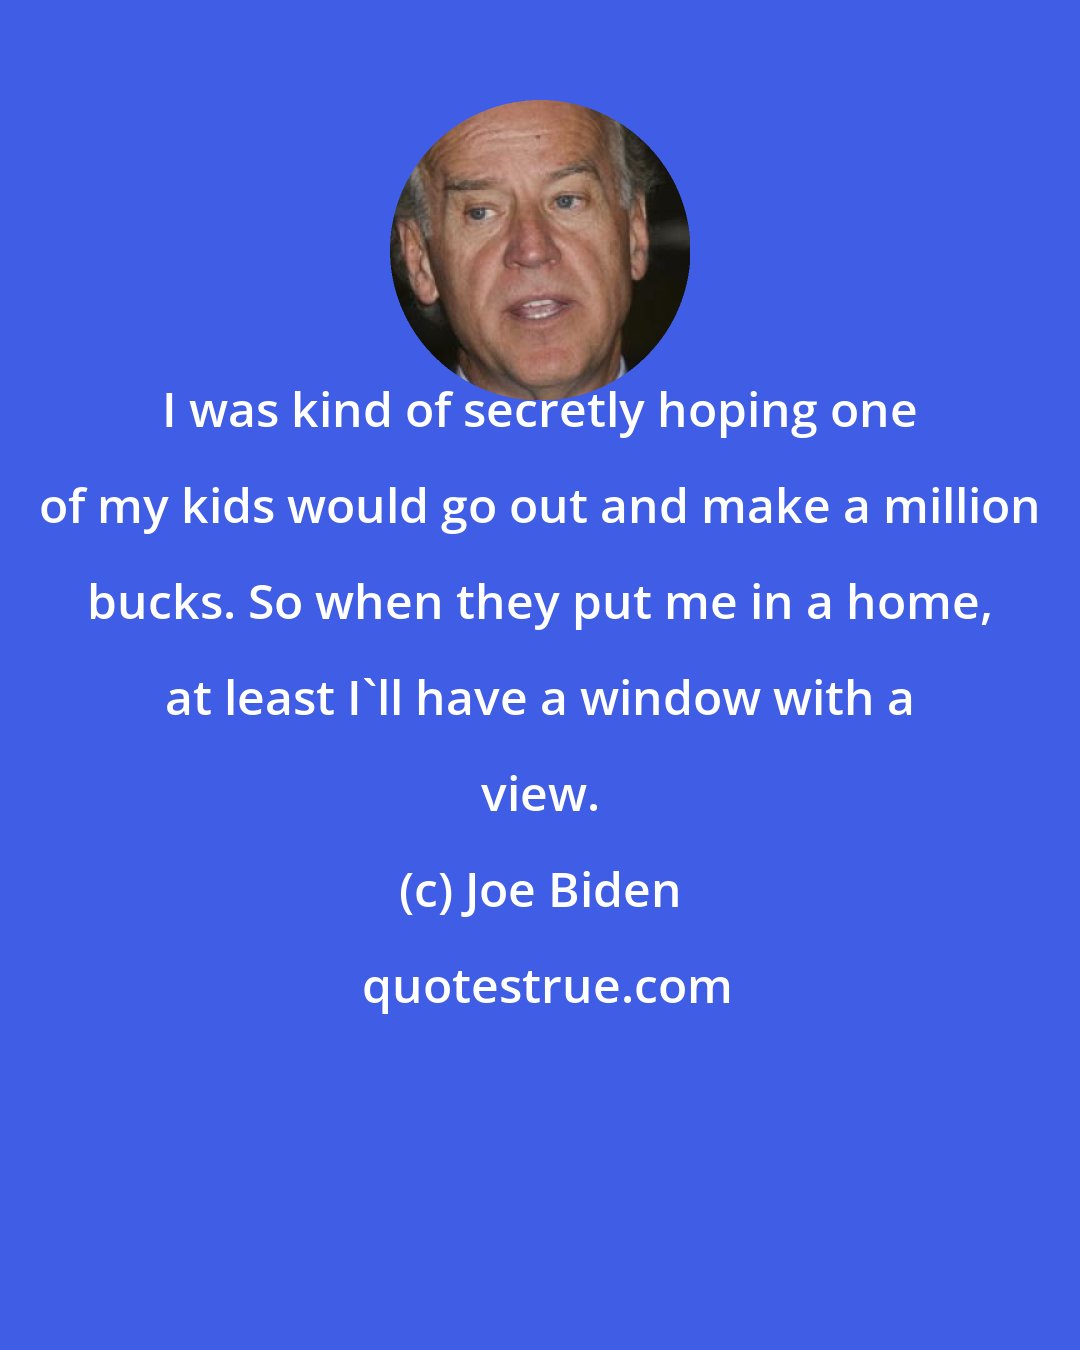 Joe Biden: I was kind of secretly hoping one of my kids would go out and make a million bucks. So when they put me in a home, at least I'll have a window with a view.